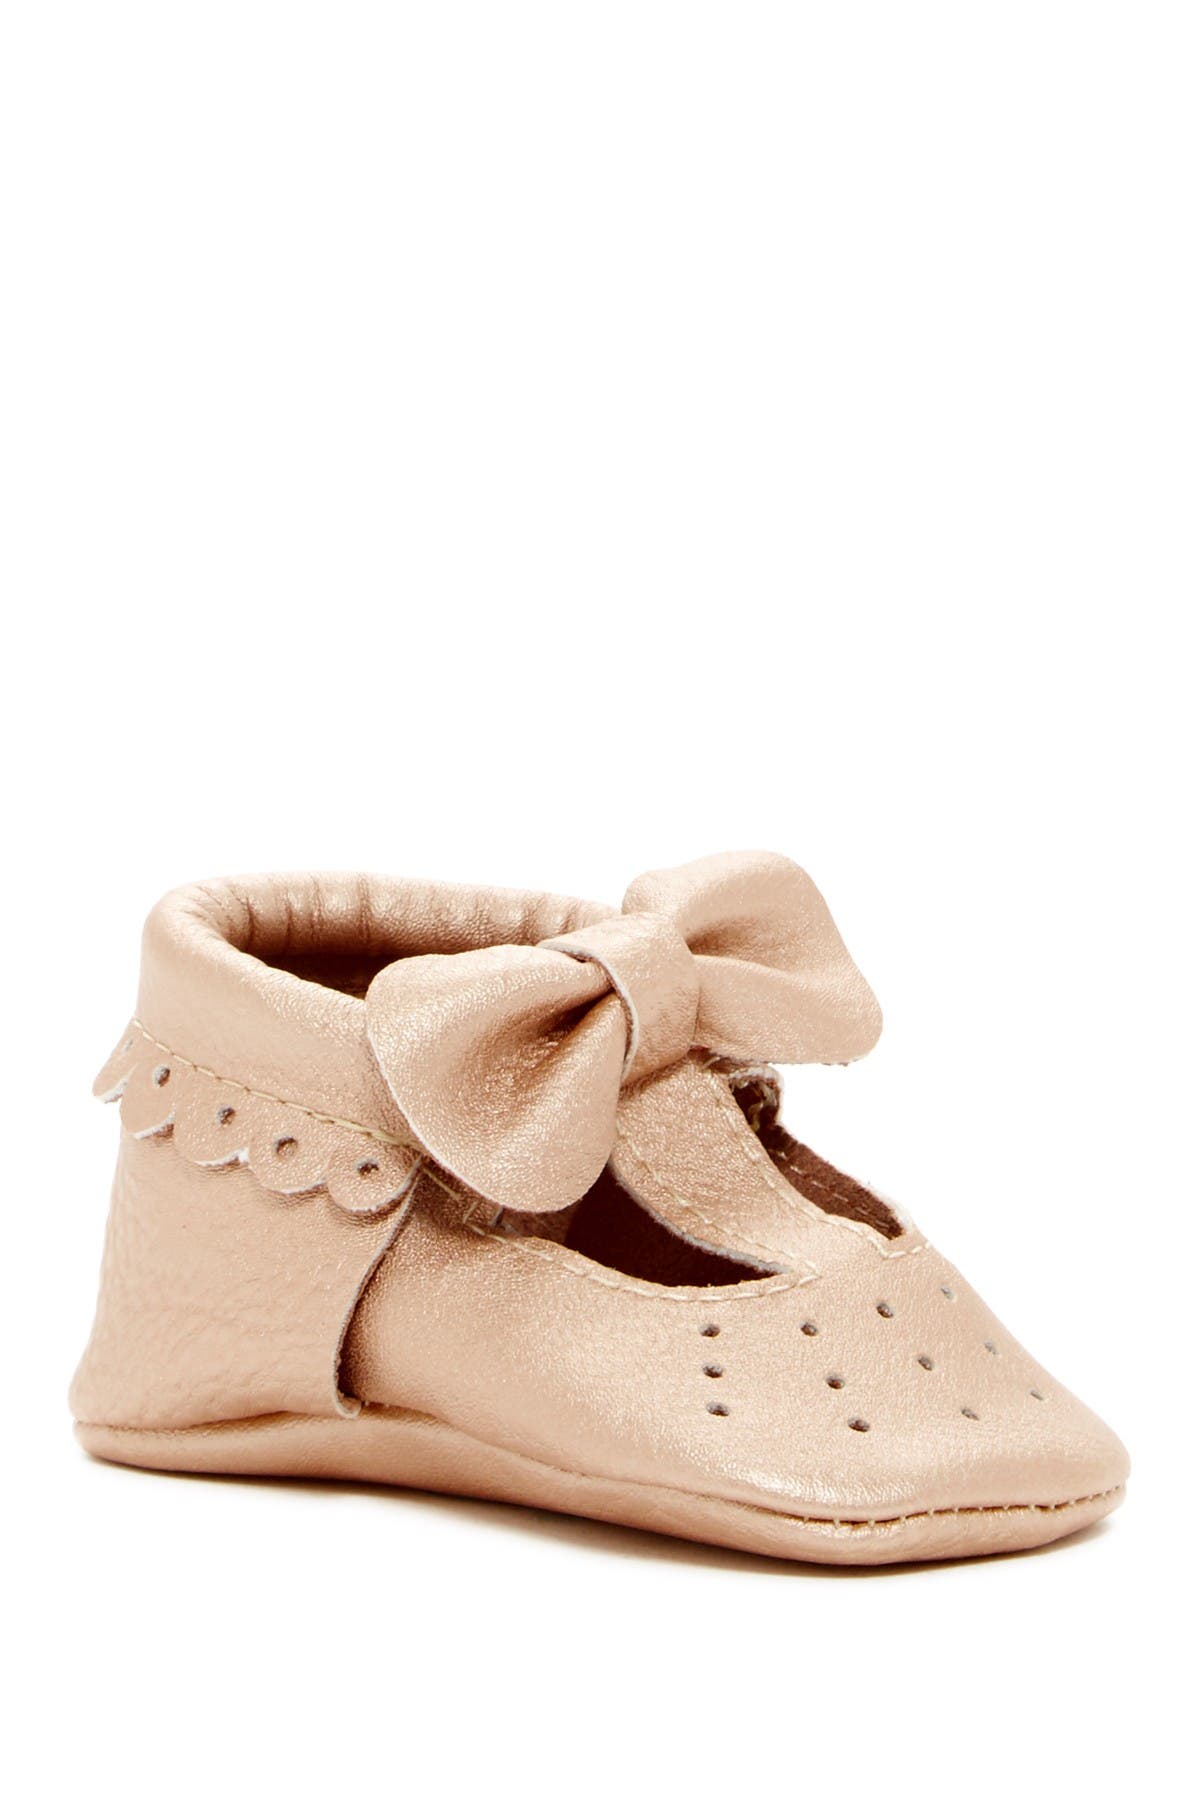 t strap moccasin baby